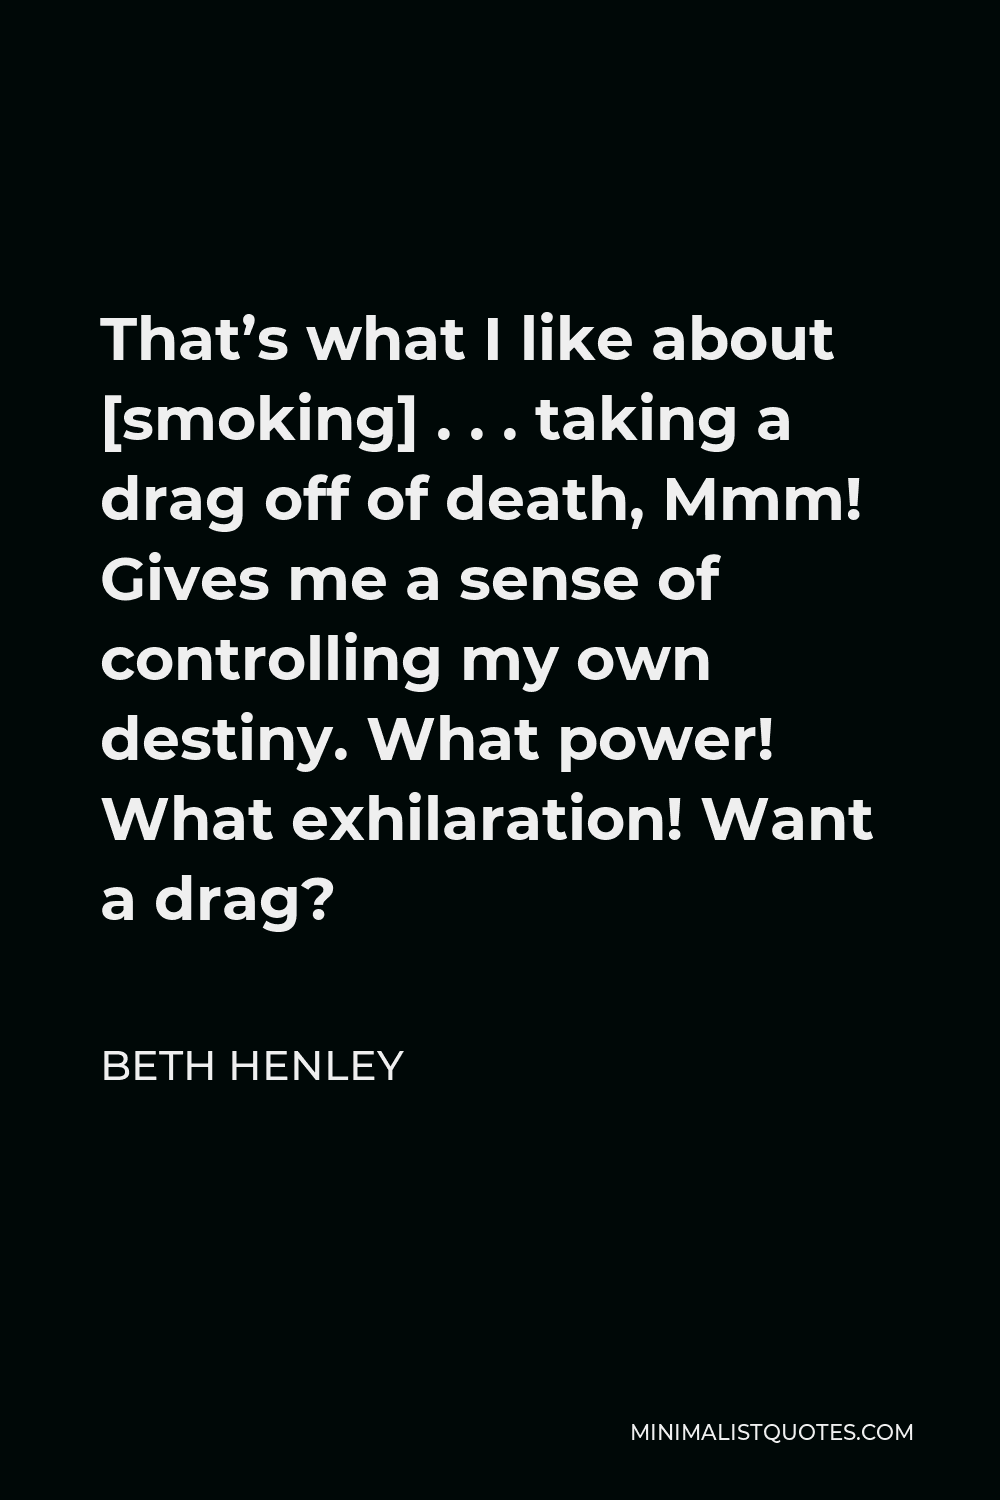 Beth Henley Quote - That’s what I like about [smoking] . . . taking a drag off of death, Mmm! Gives me a sense of controlling my own destiny. What power! What exhilaration! Want a drag?